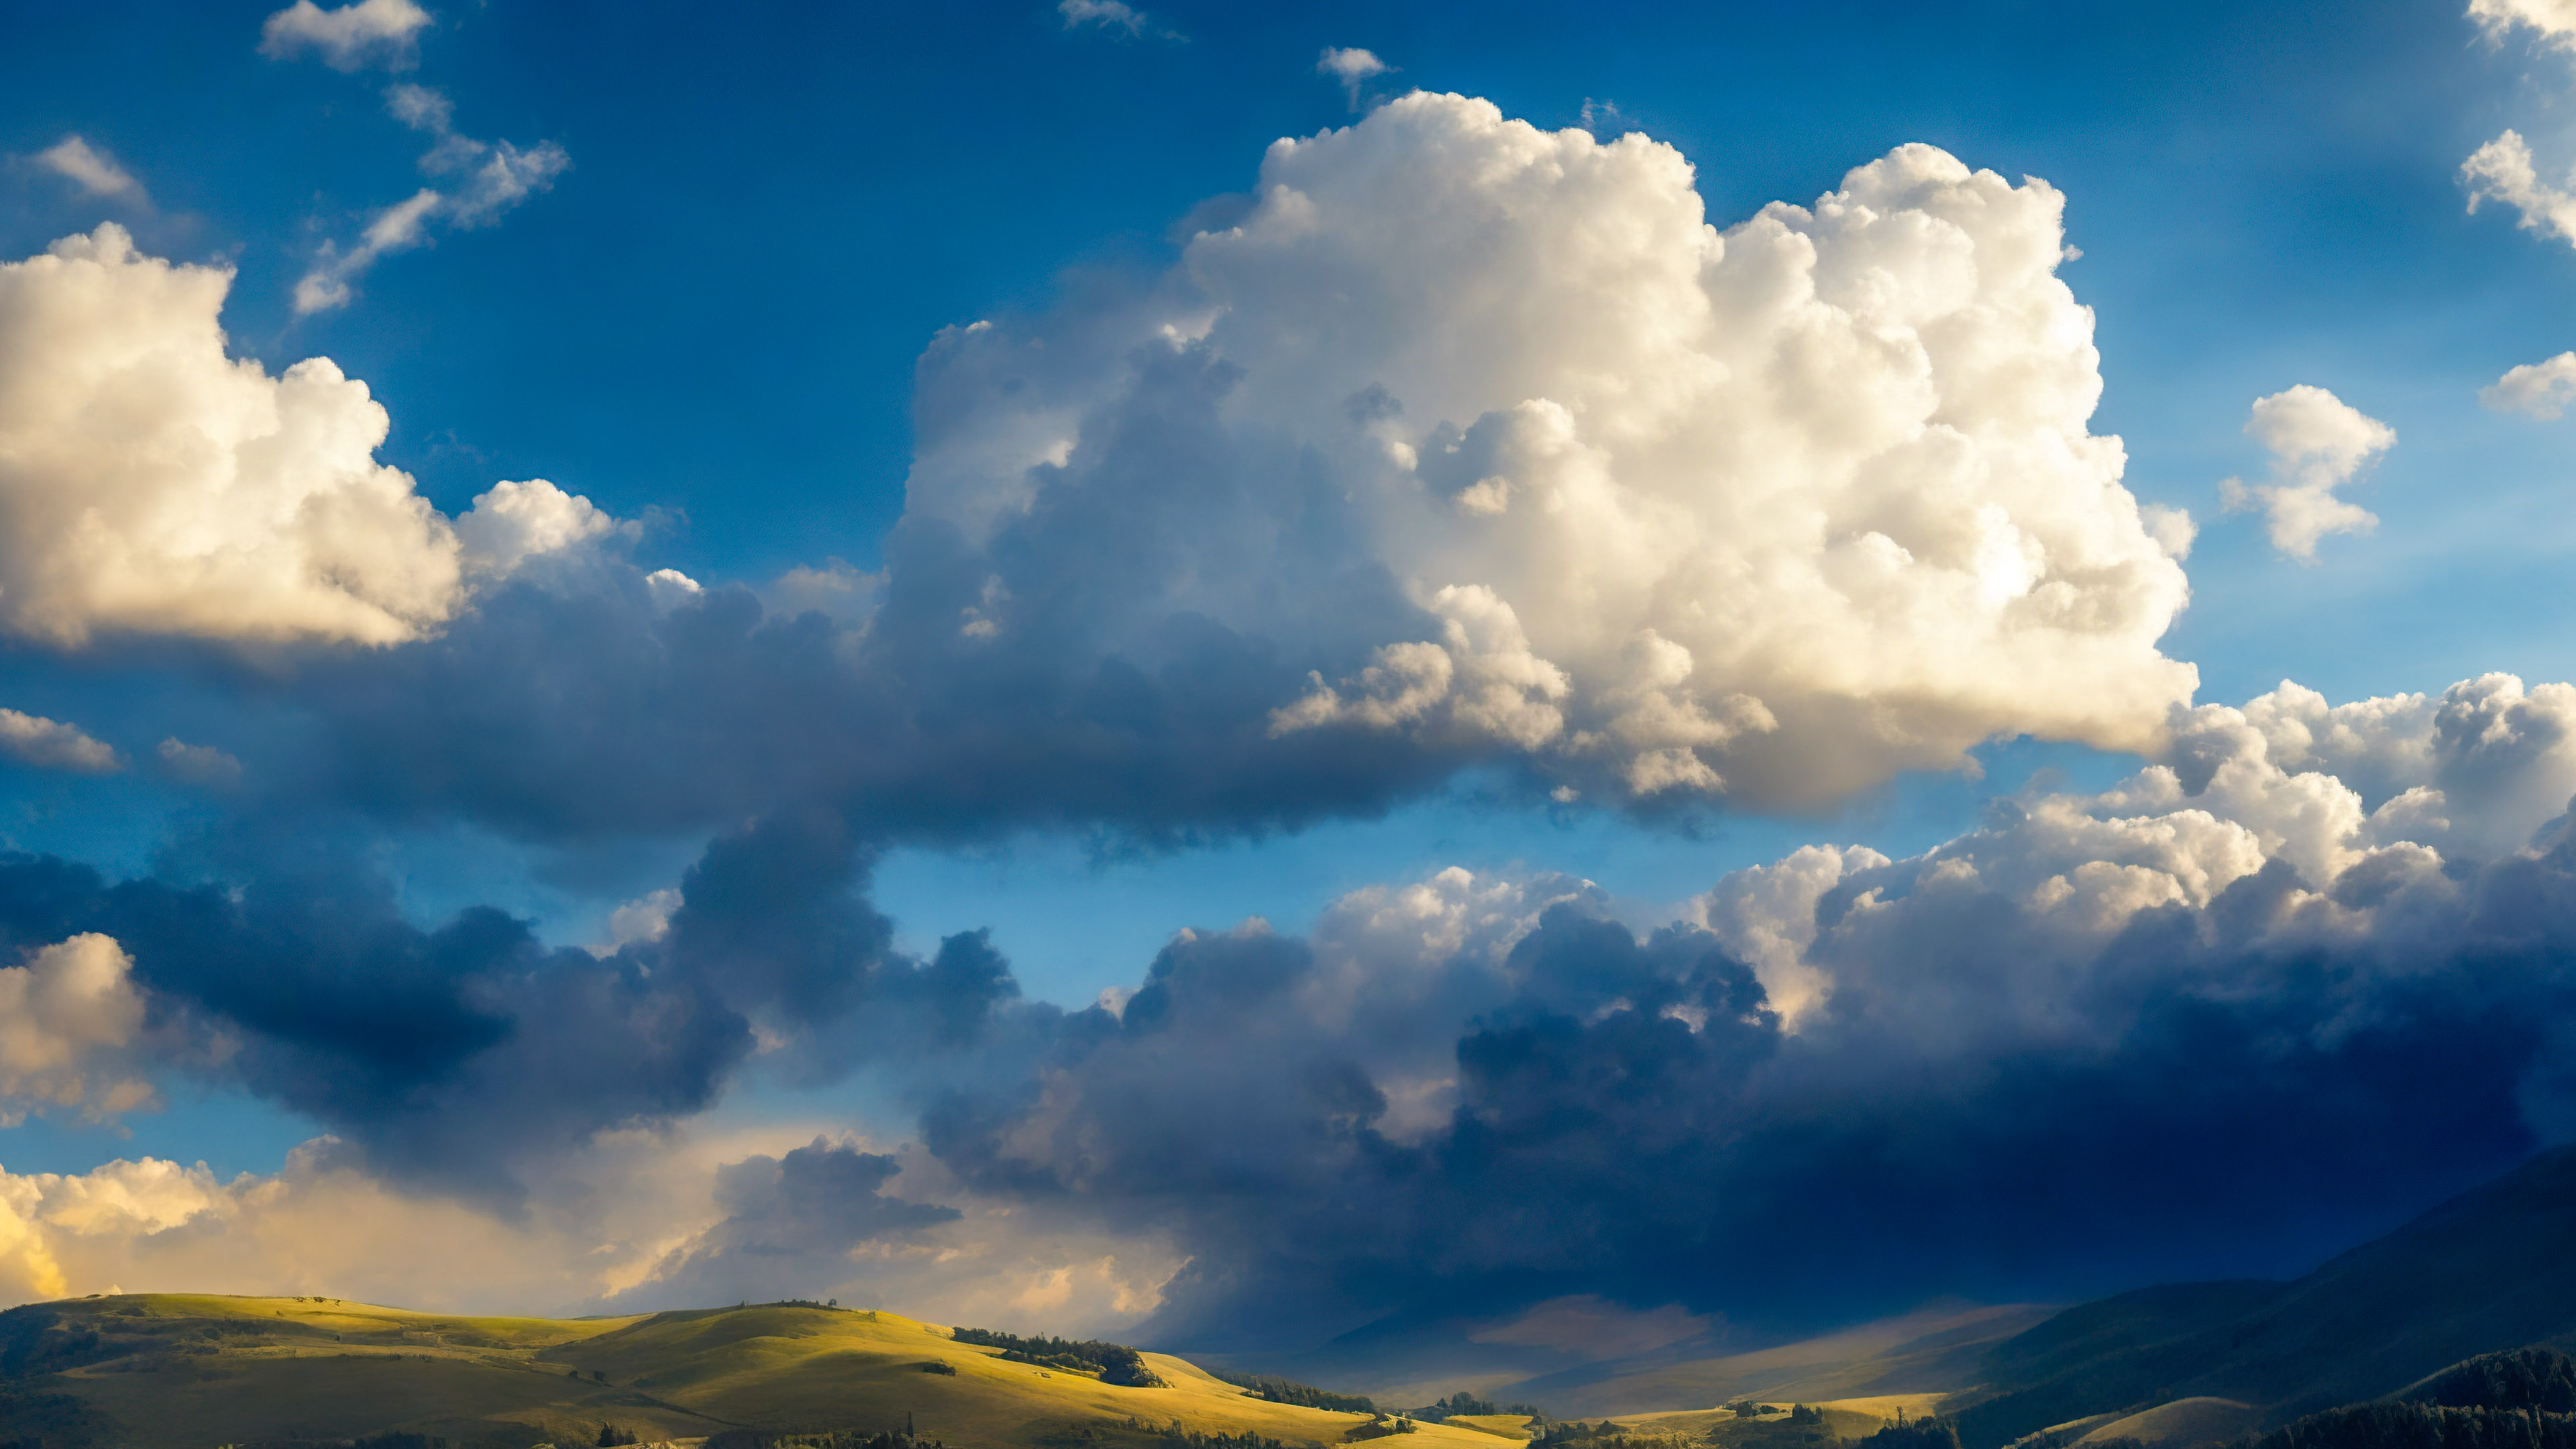 Get a taste of the dramatic with cool background, presenting a dramatic sky filled with towering, cumulonimbus clouds casting shadows over a sunlit valley.